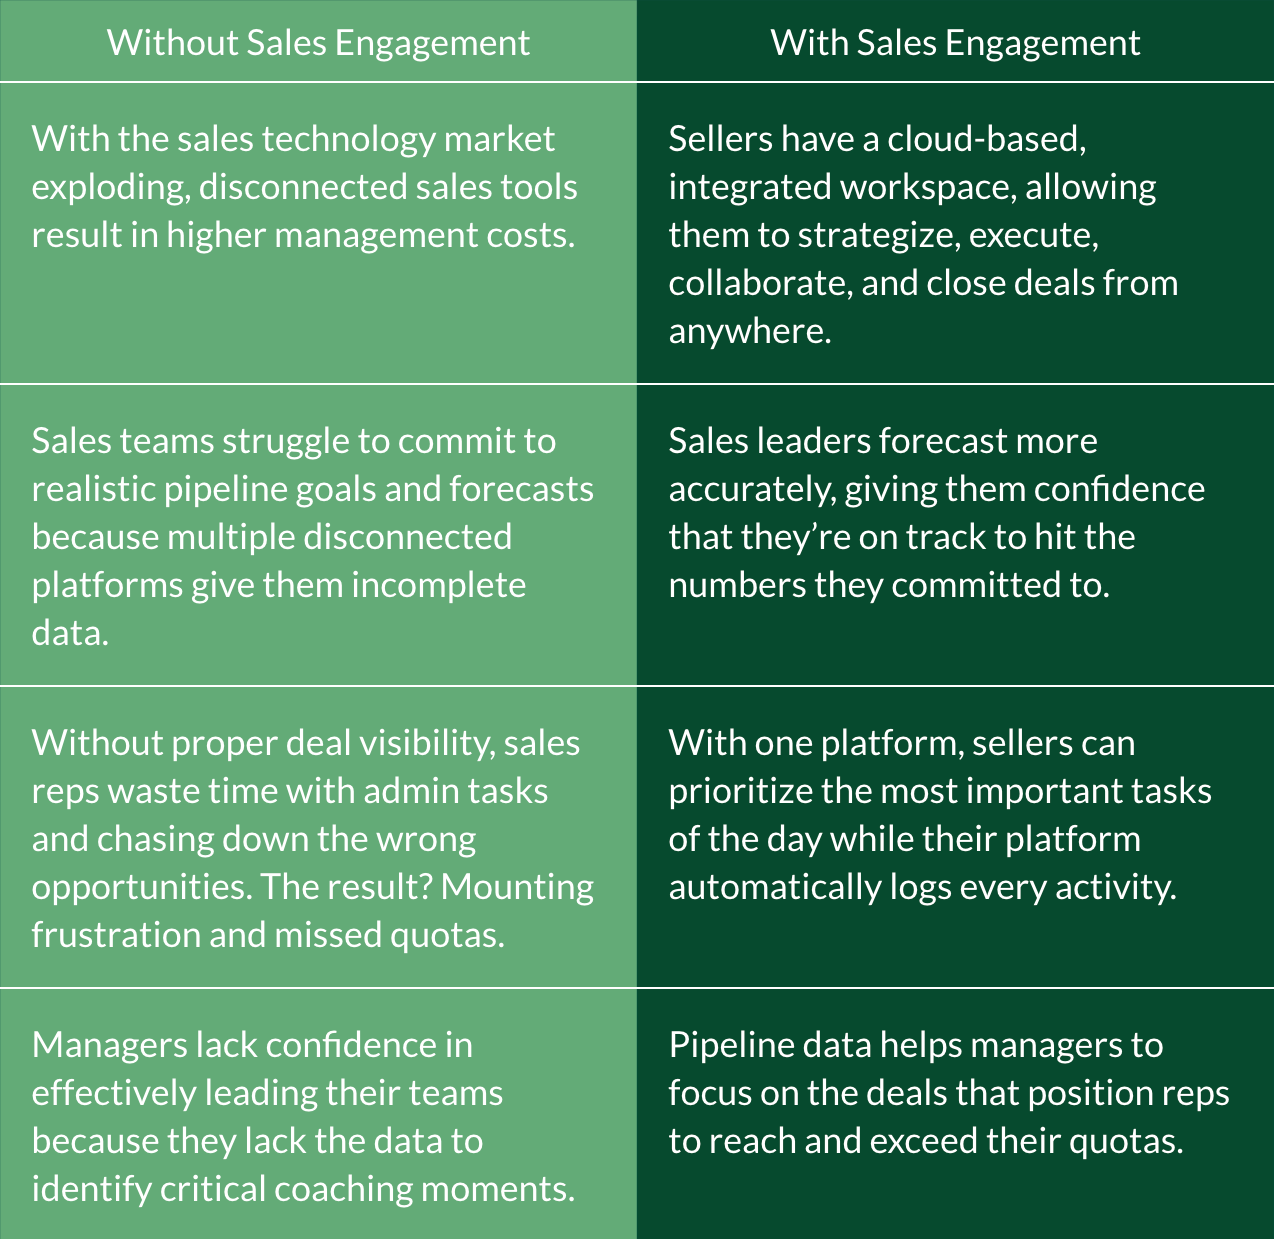 Table comparing the benefits of having a sales engagement tool versus the challenges of working without one